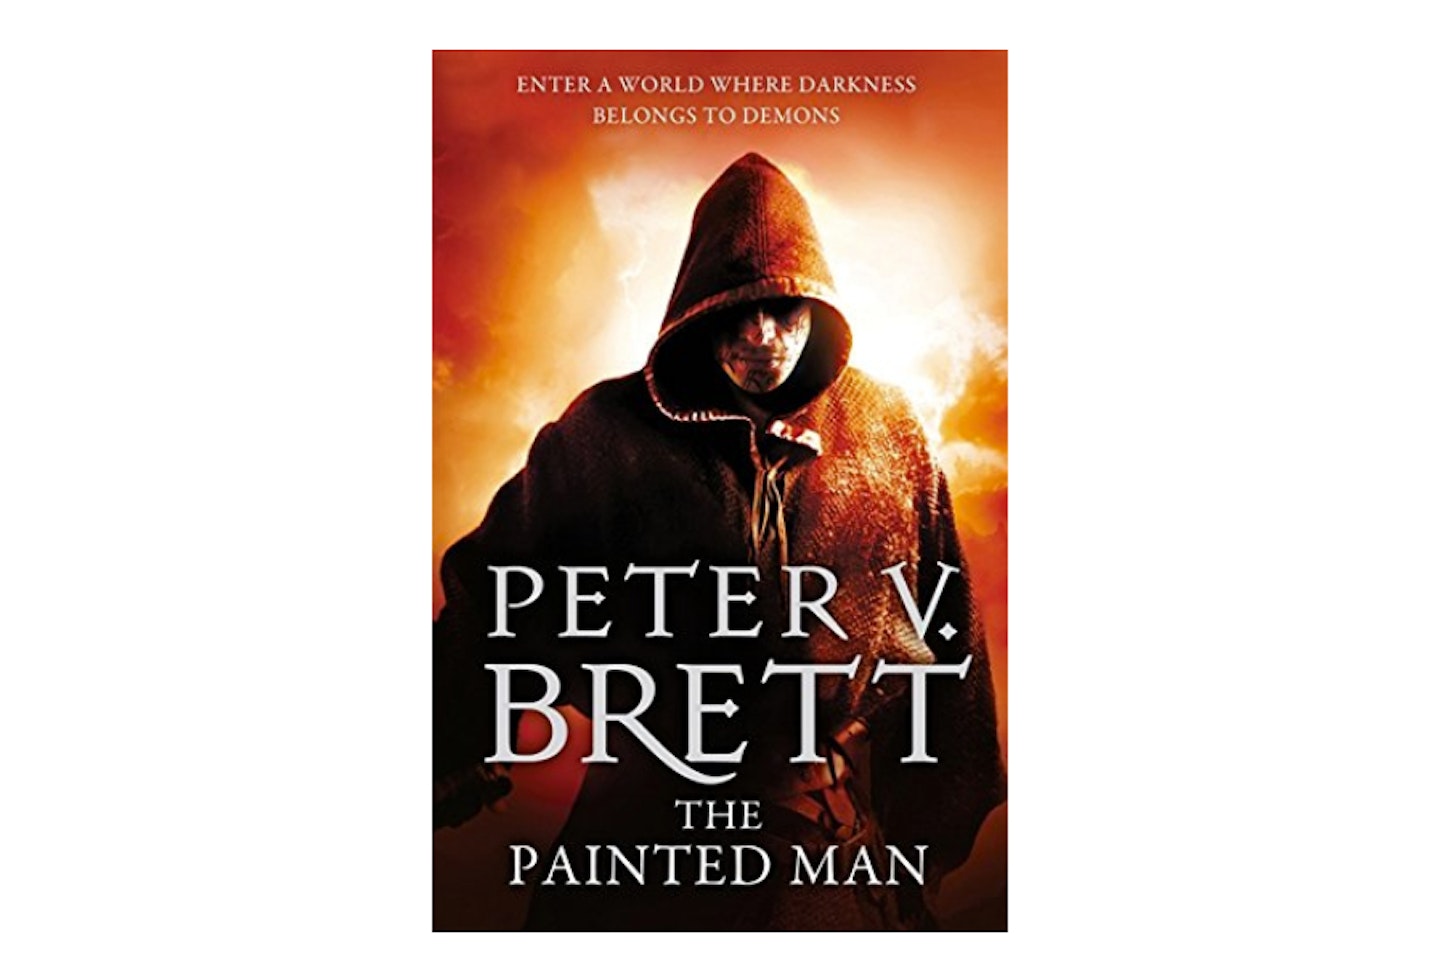 The Painted Man (The Demon Cycle Book One) by Peter V. Brett